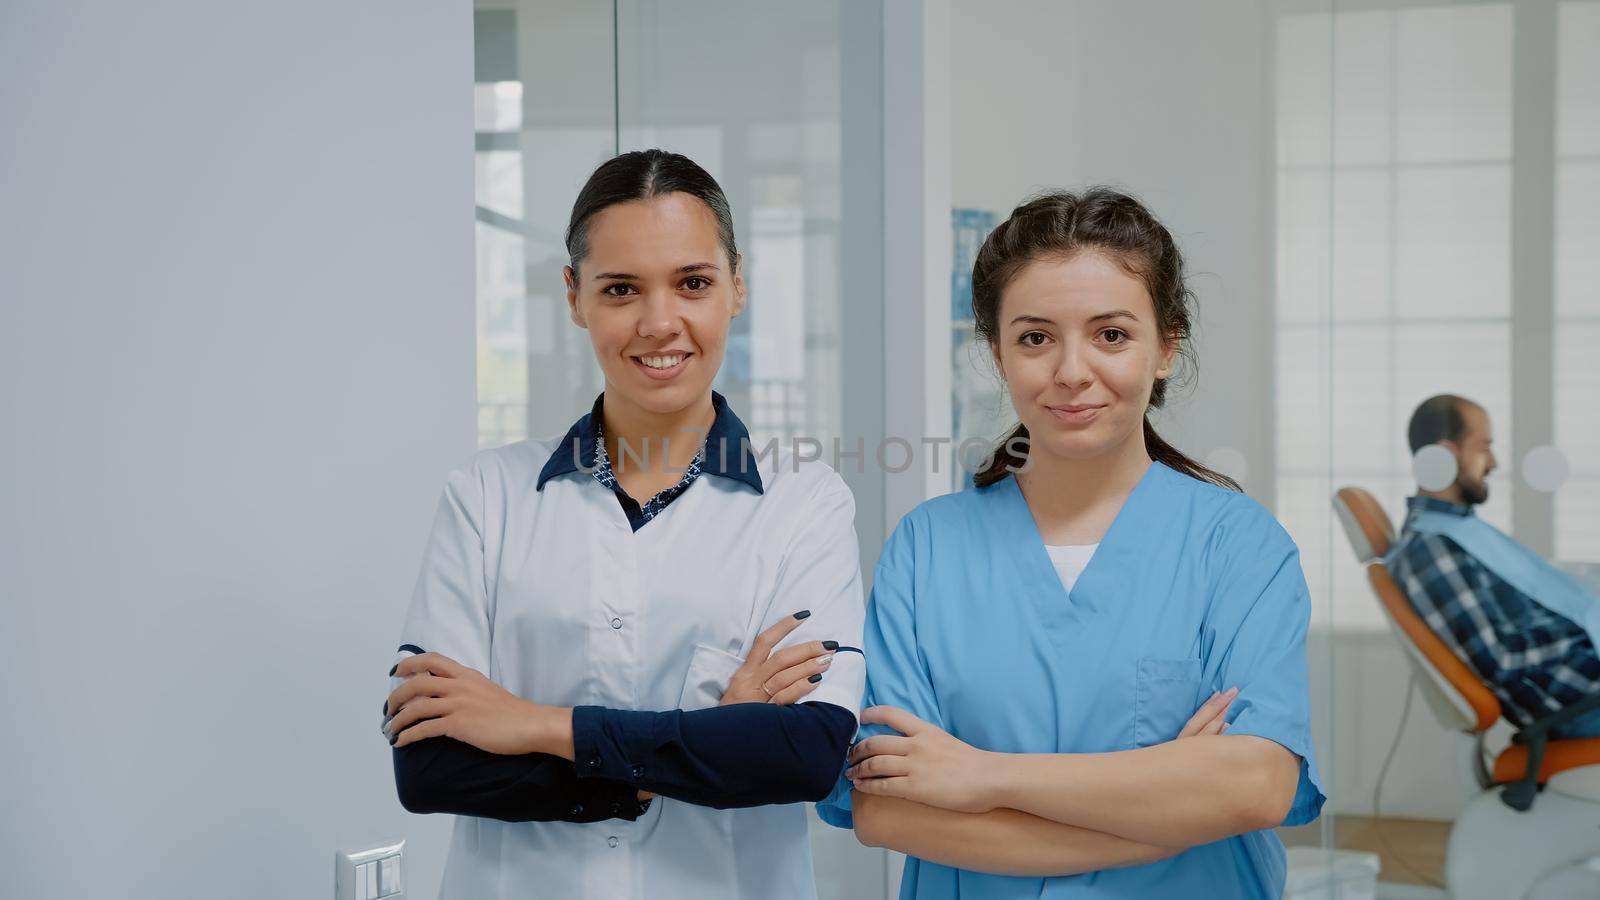 Dentist and nurse in medical uniform standing at dental clinic by DCStudio